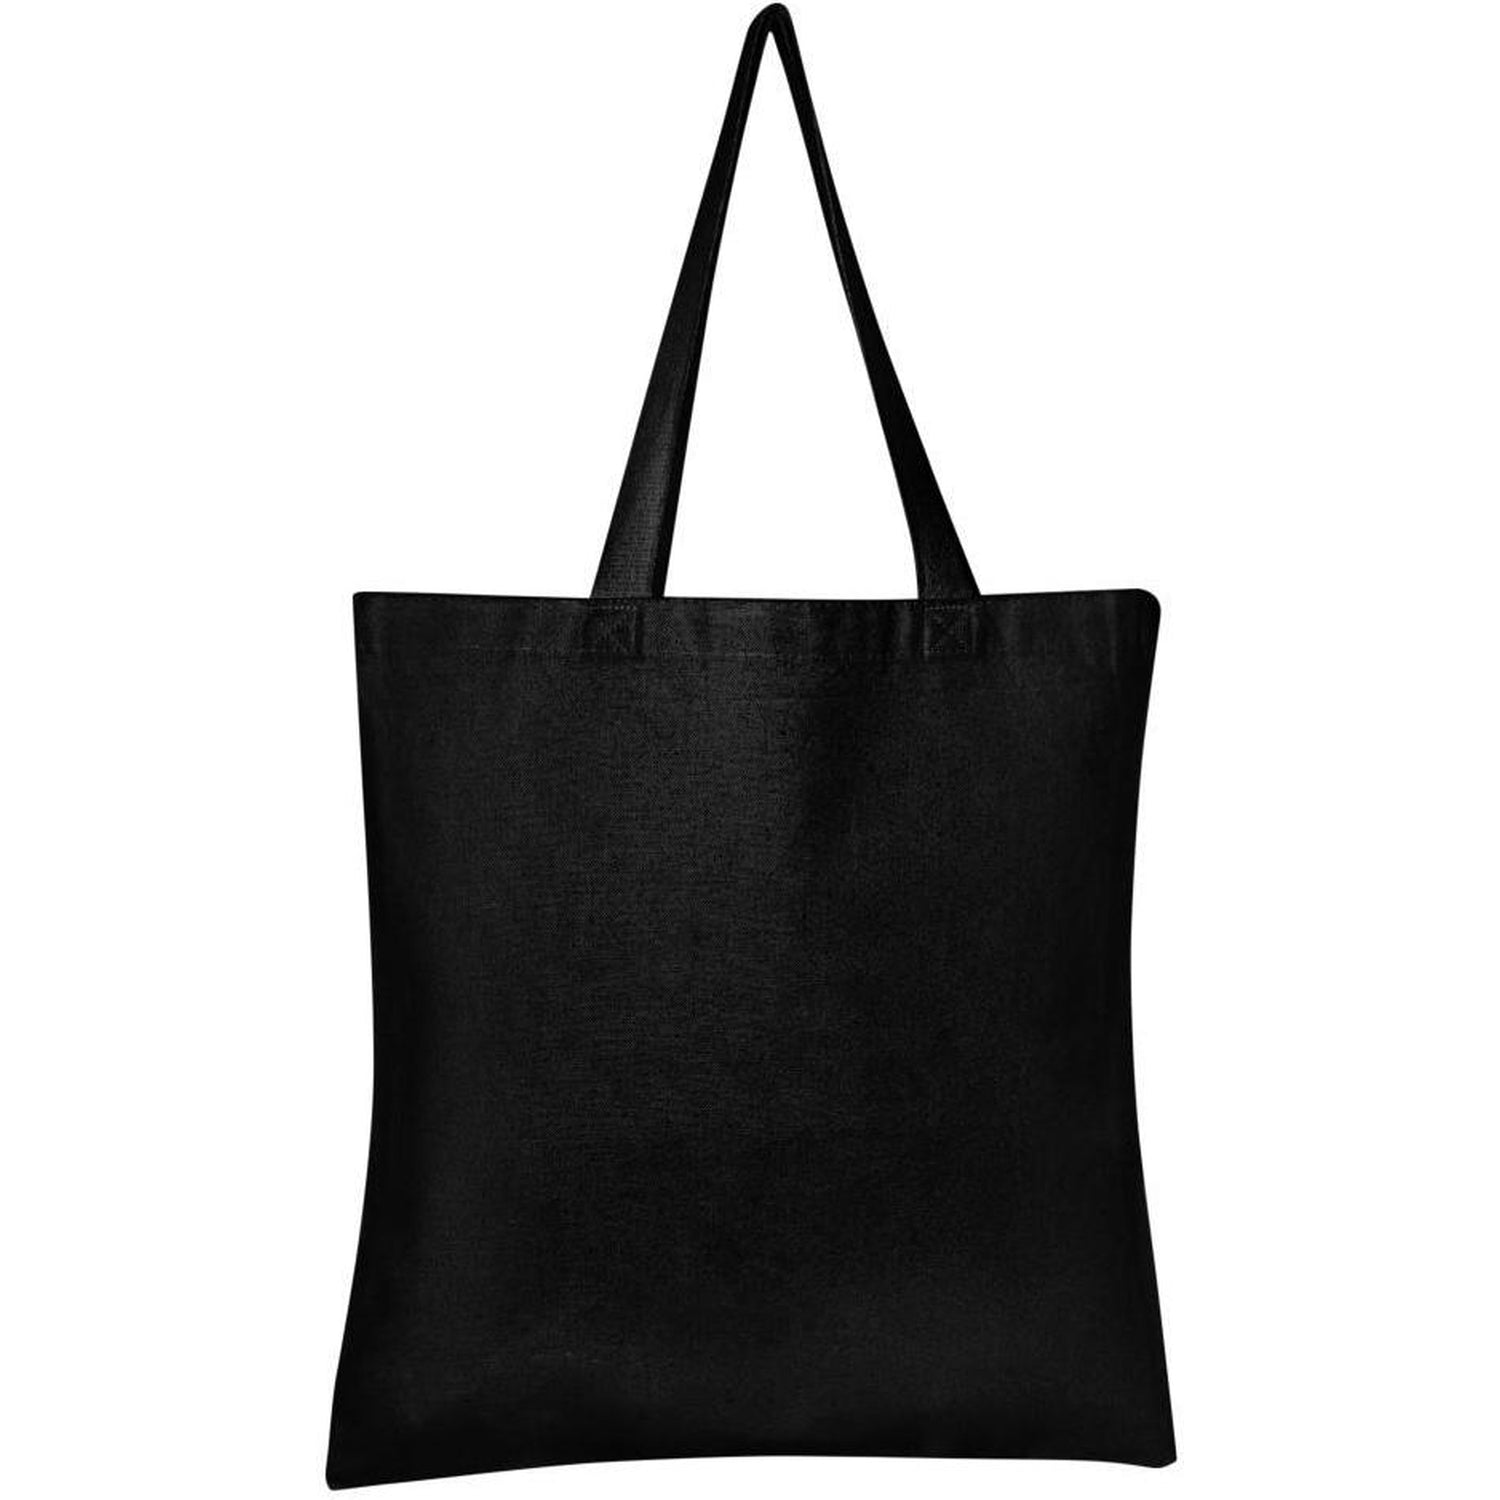 Canvas Tote Bags | Personalized Tote Bags & Tote Bags Wholesale – BagzDepot®